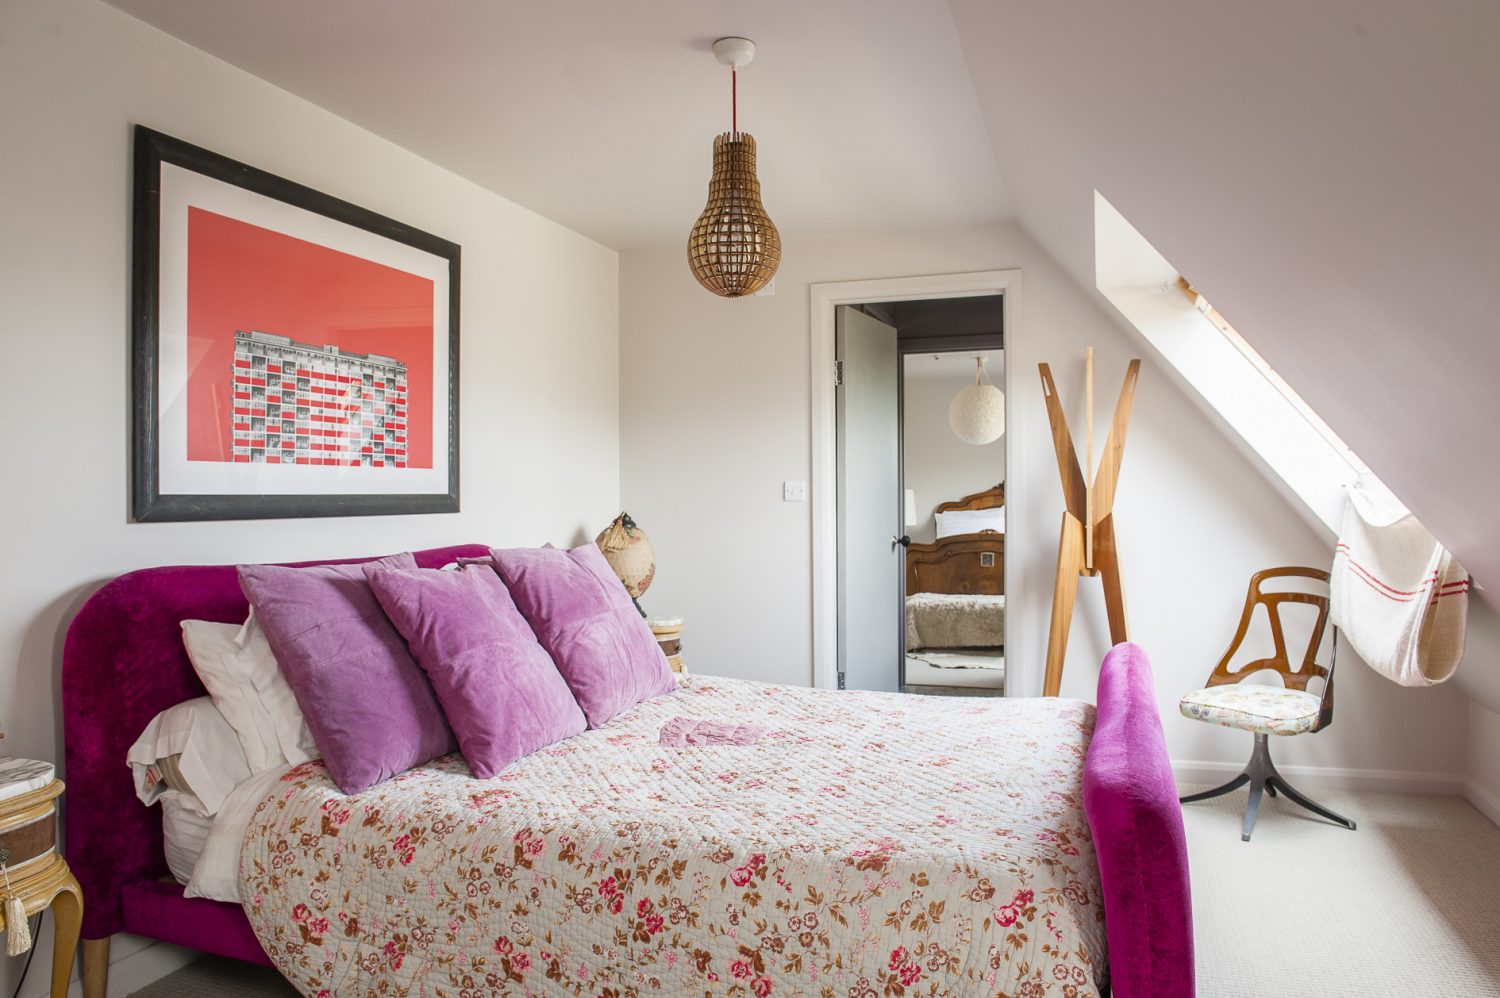 Above the pink velvet bed in the second bedroom is a print of a building in Acton